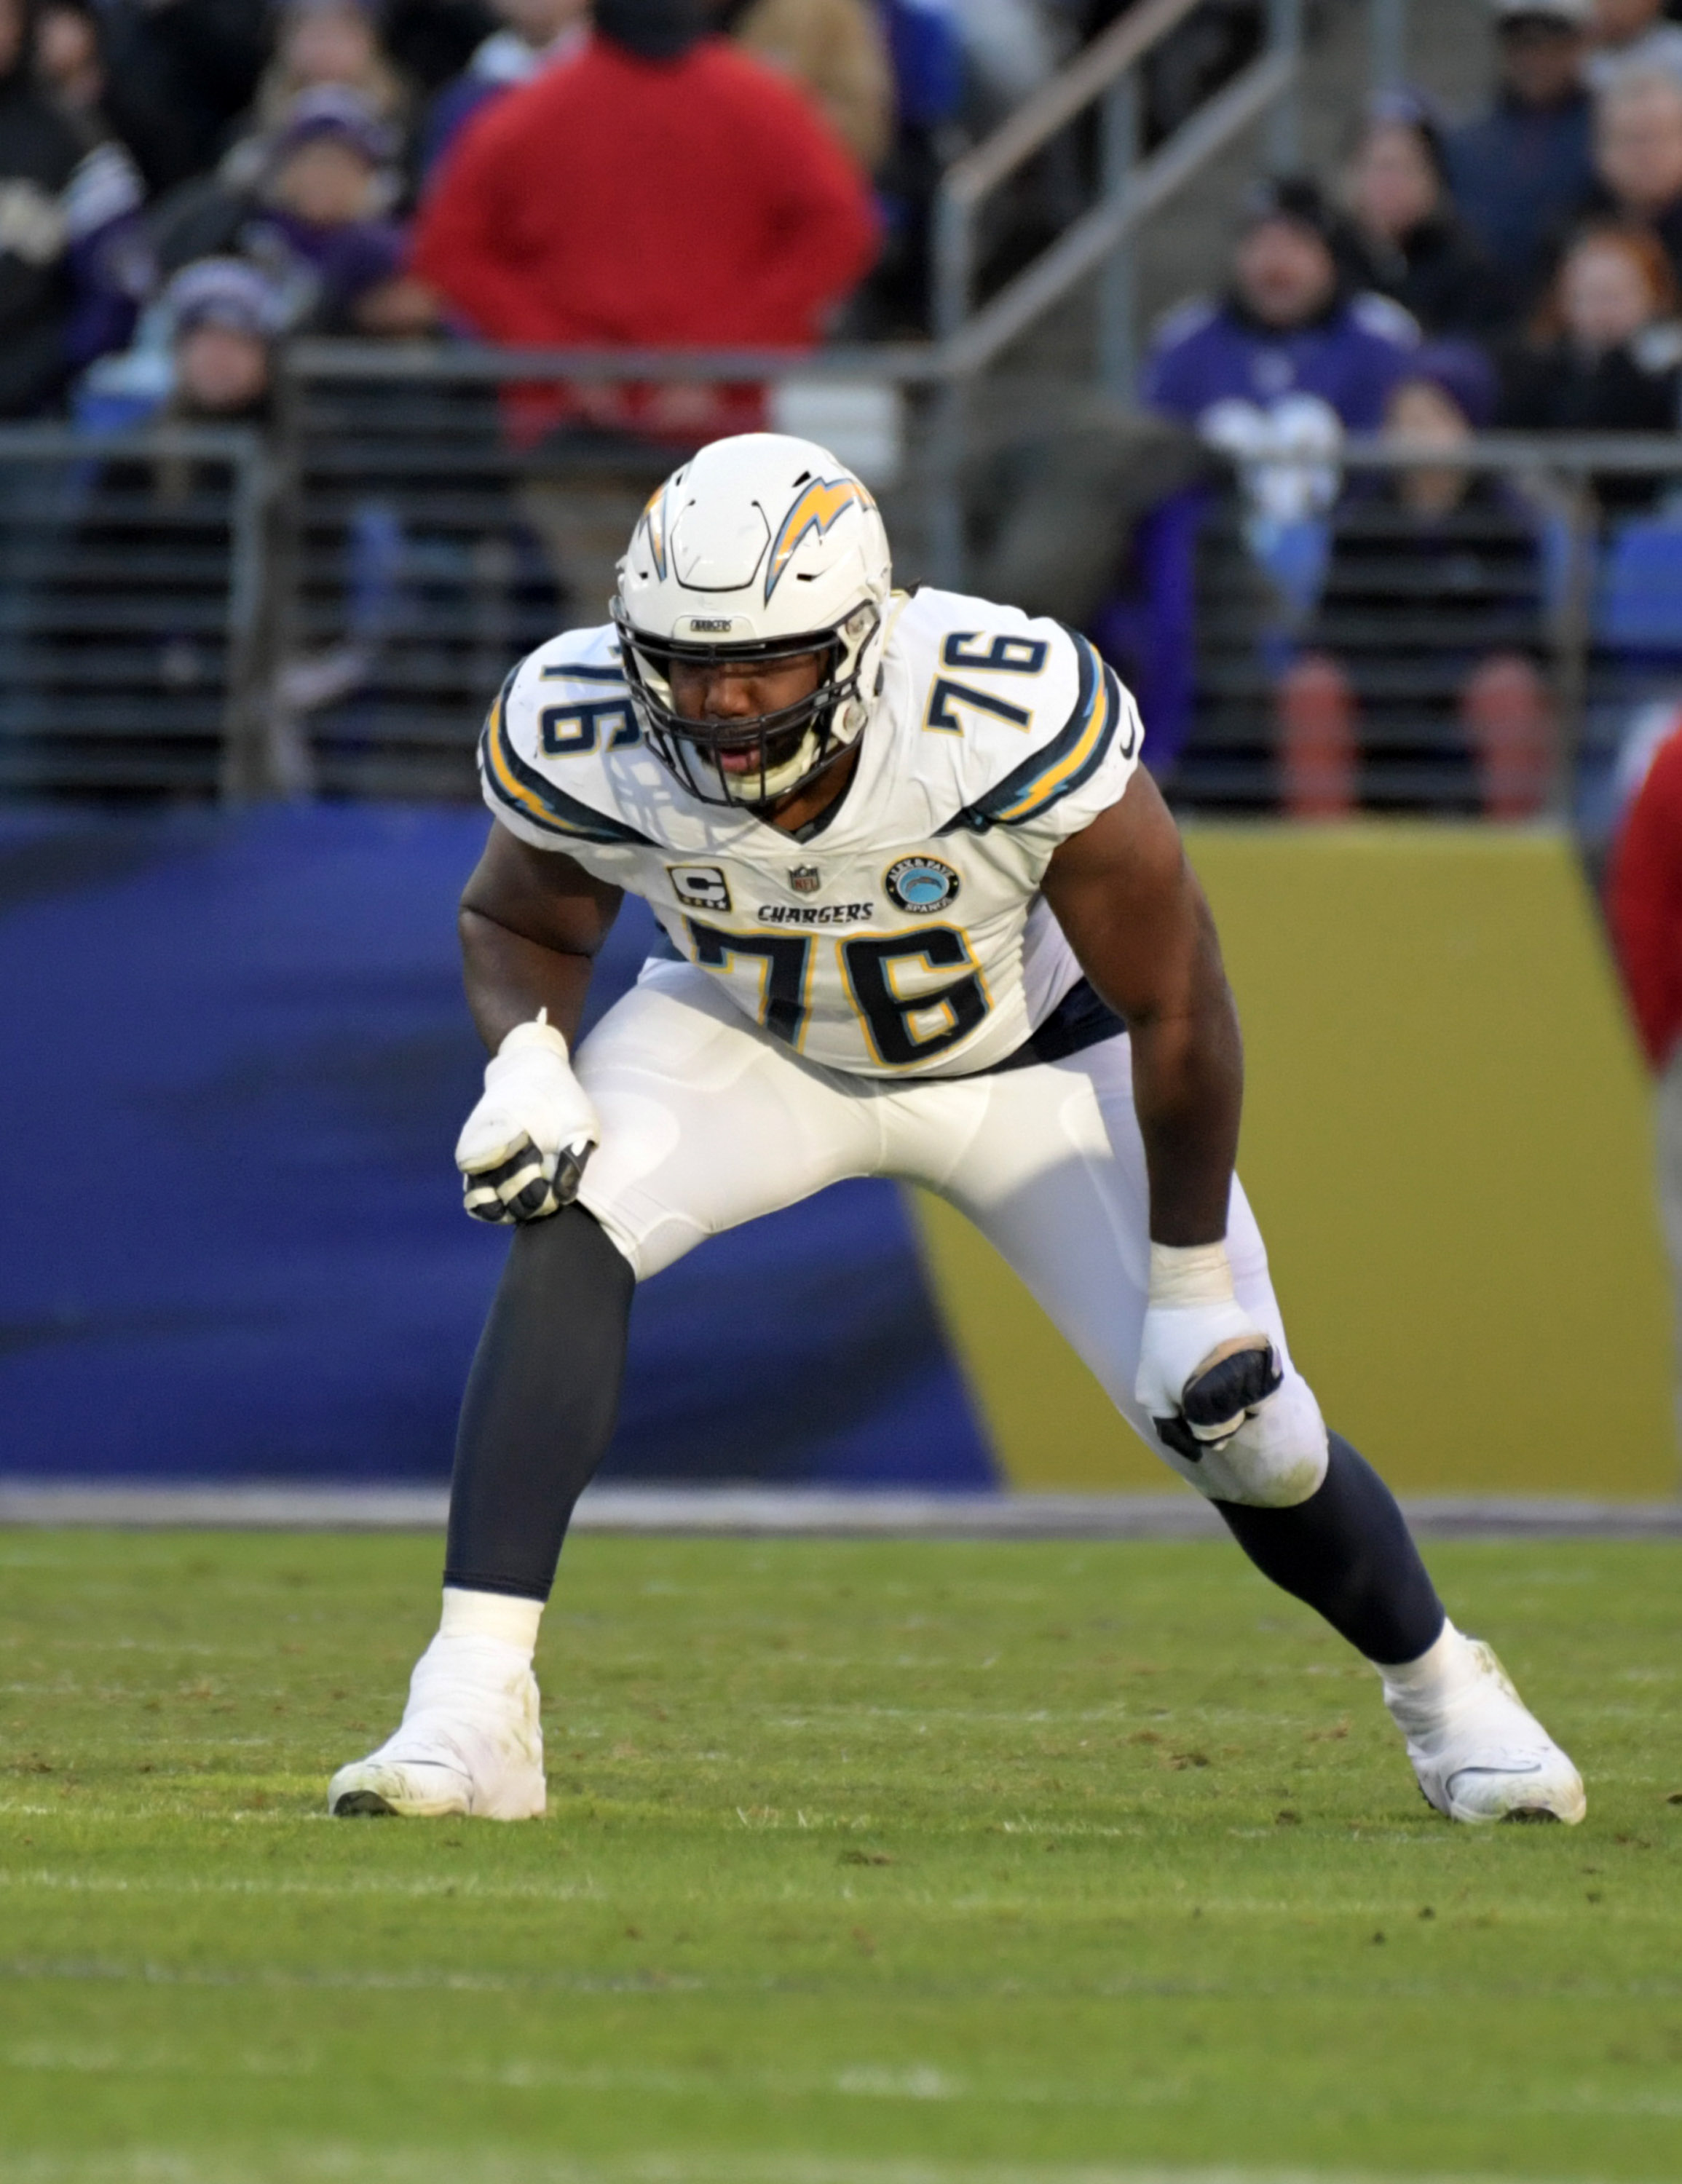 Chargers Rb Depth Chart 2018